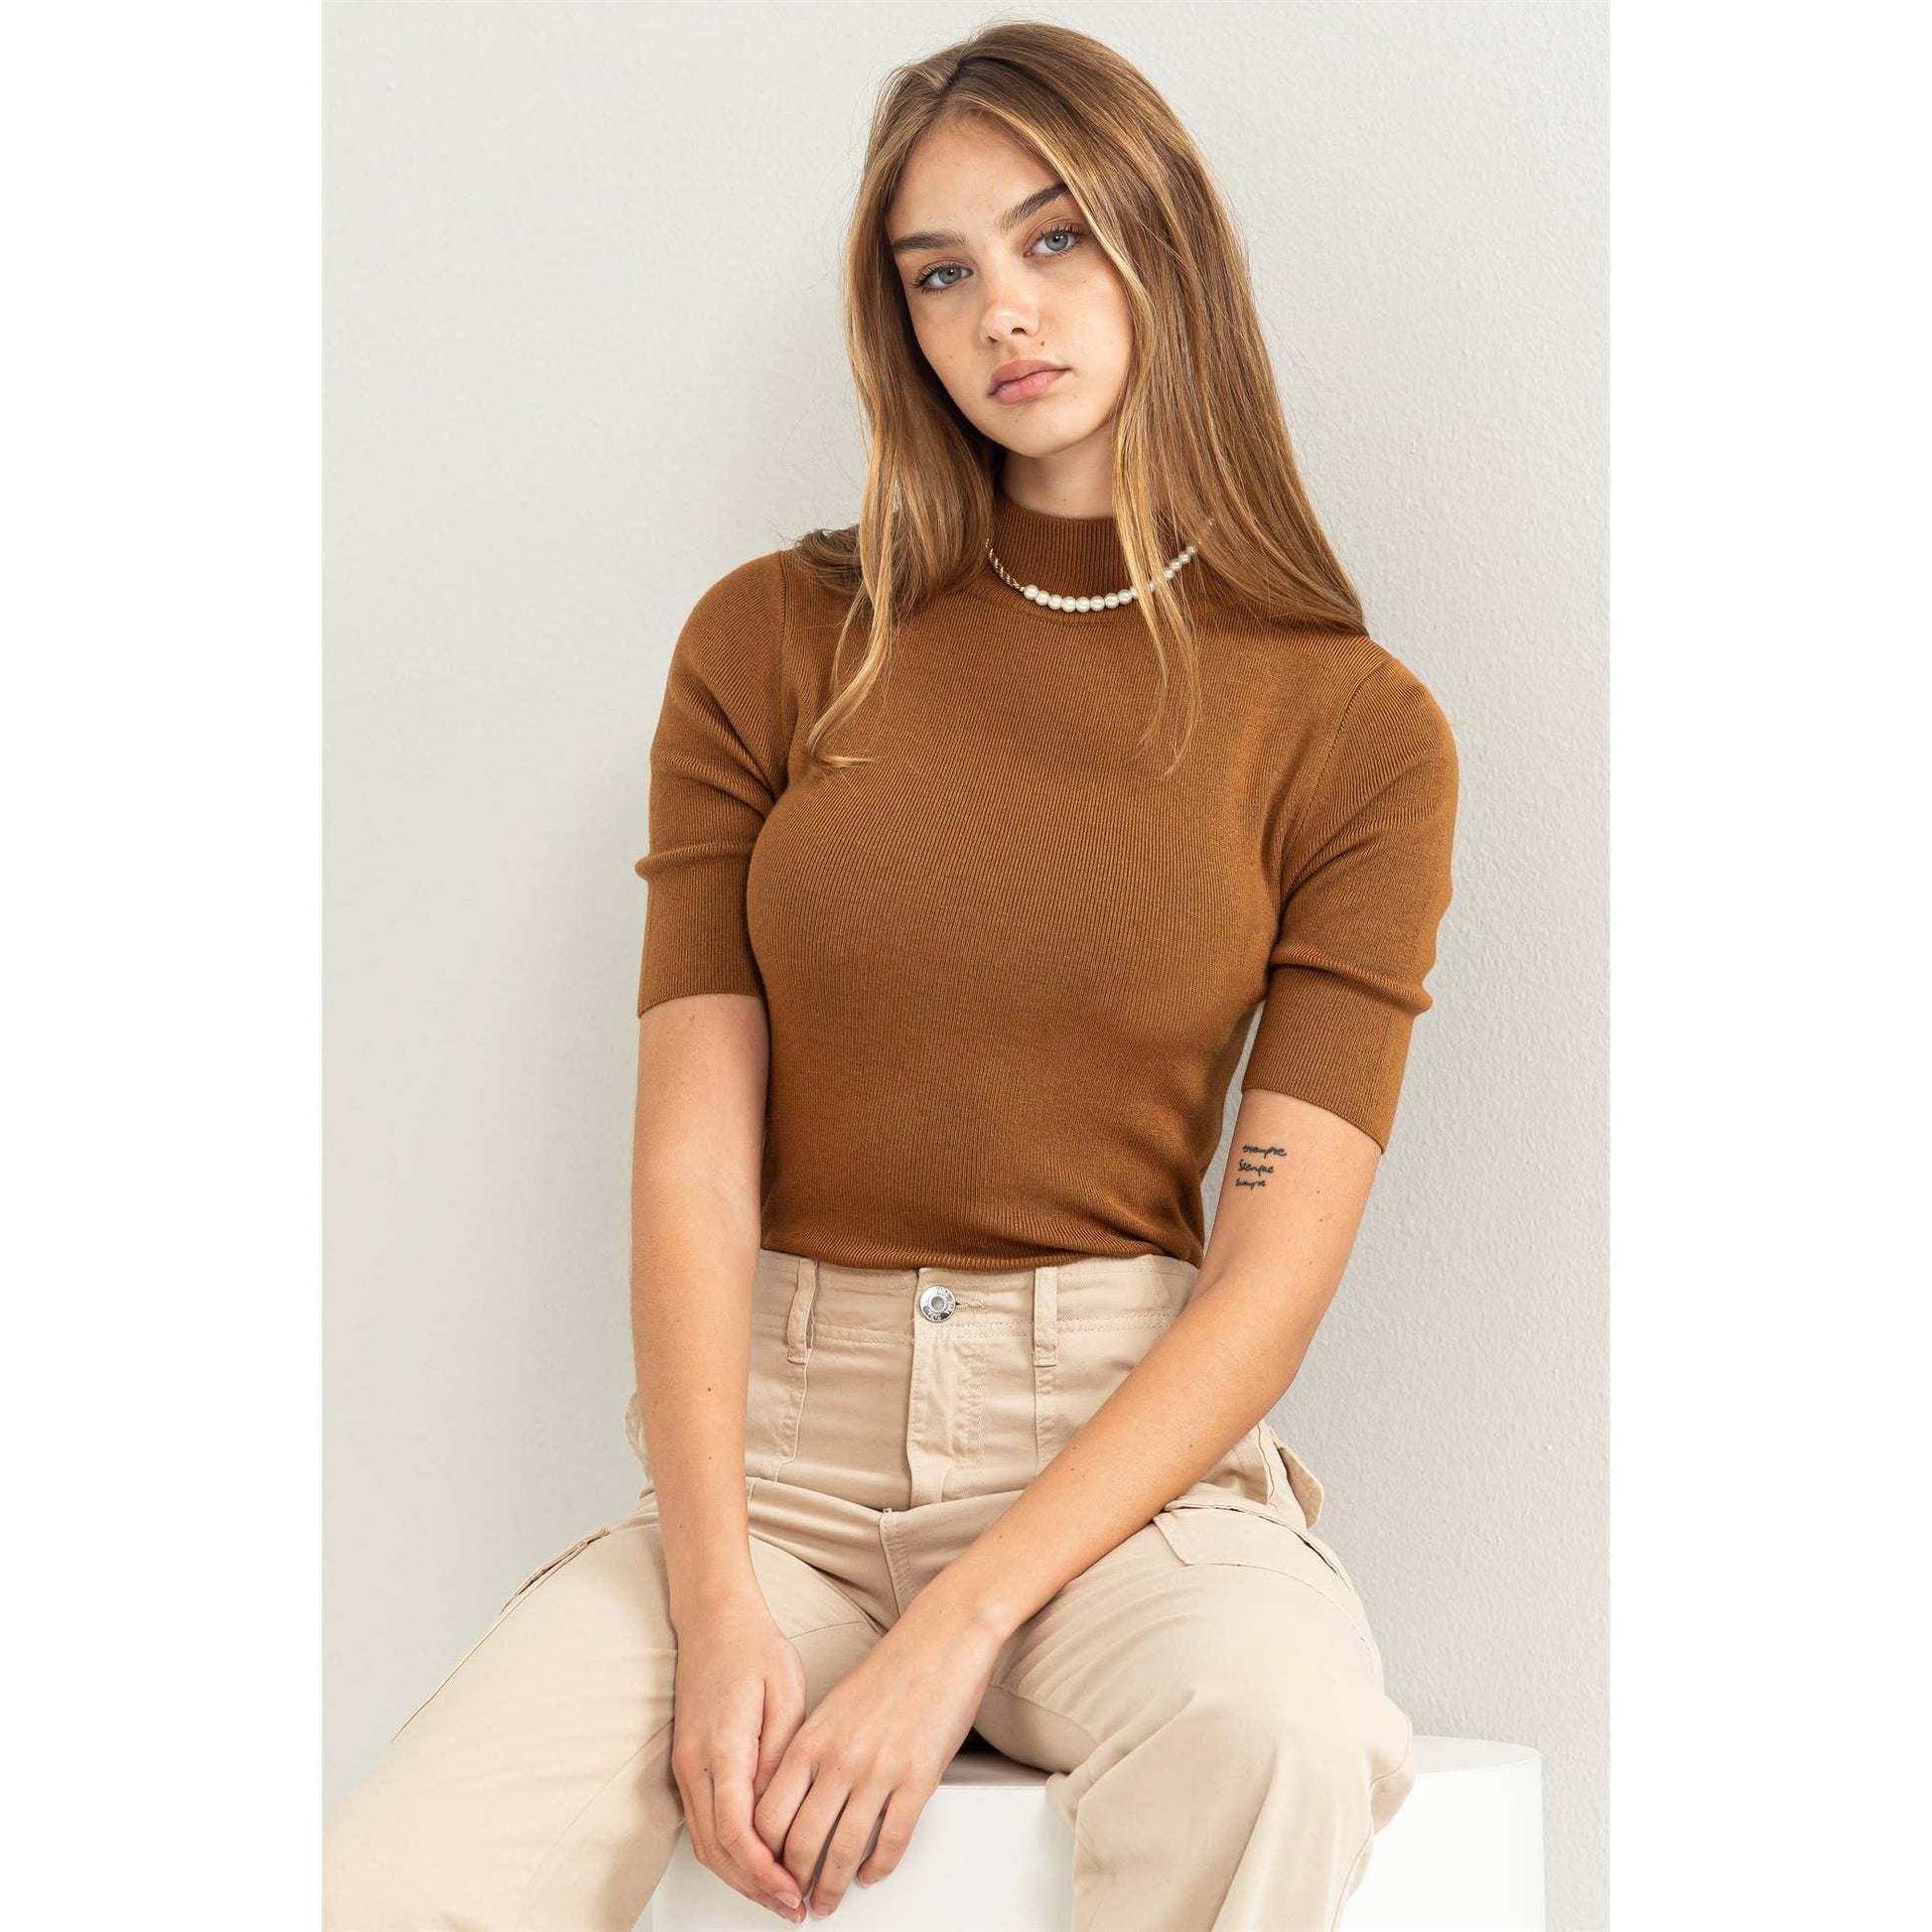 model is wearing a brown mock neck short sleeve tee with light colored pants